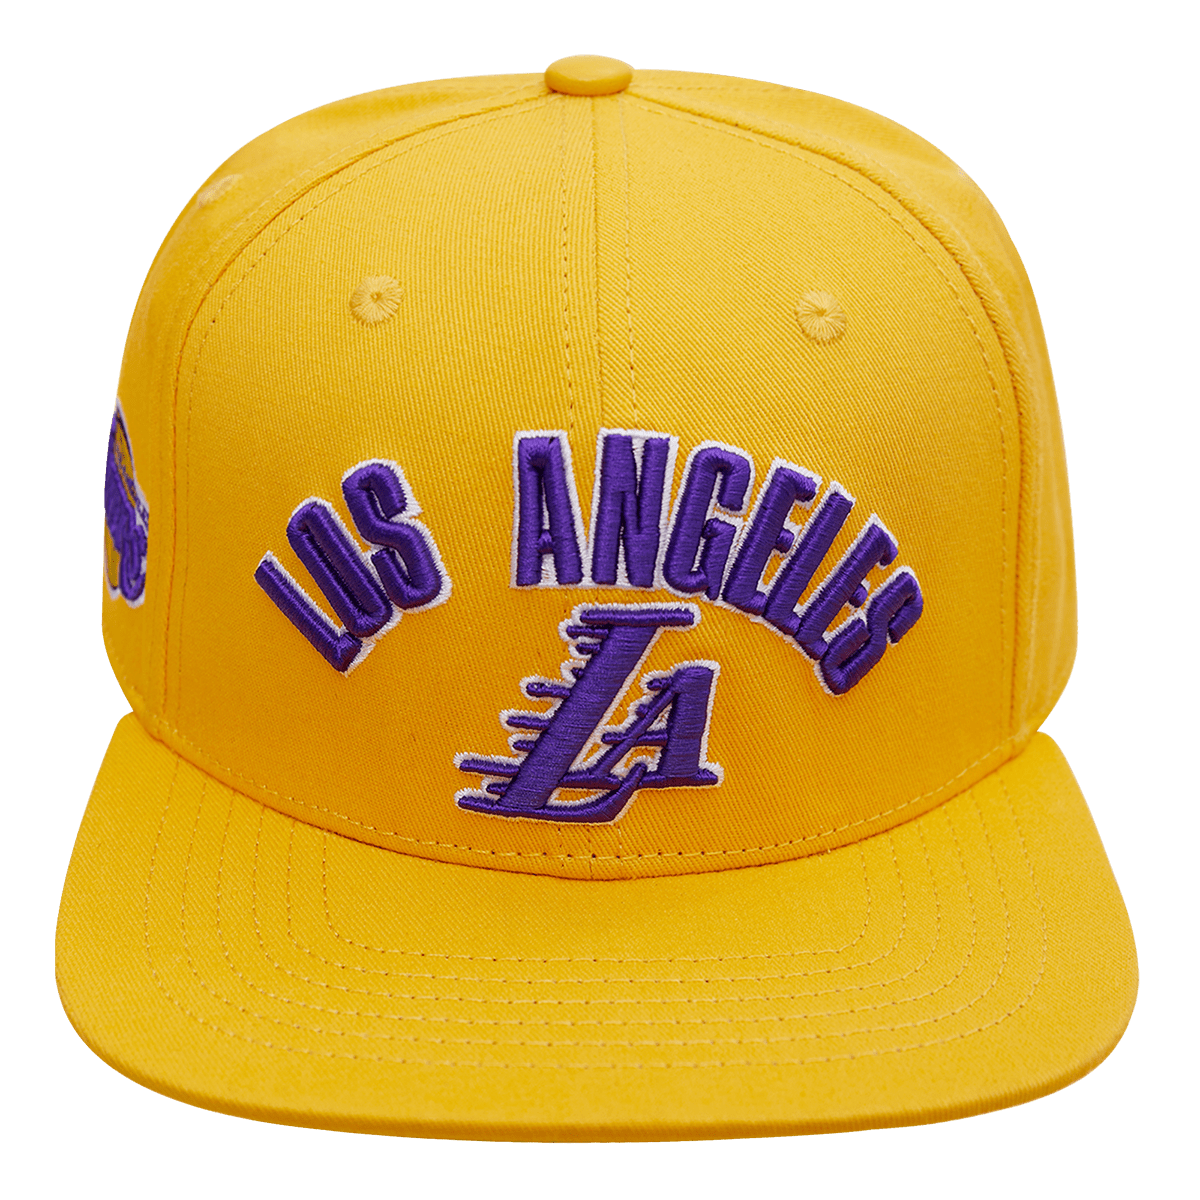 LOS ANGELES LAKERS STACKED LOGO WOOL SNAPBACK HAT (YELLOW) – Pro Standard